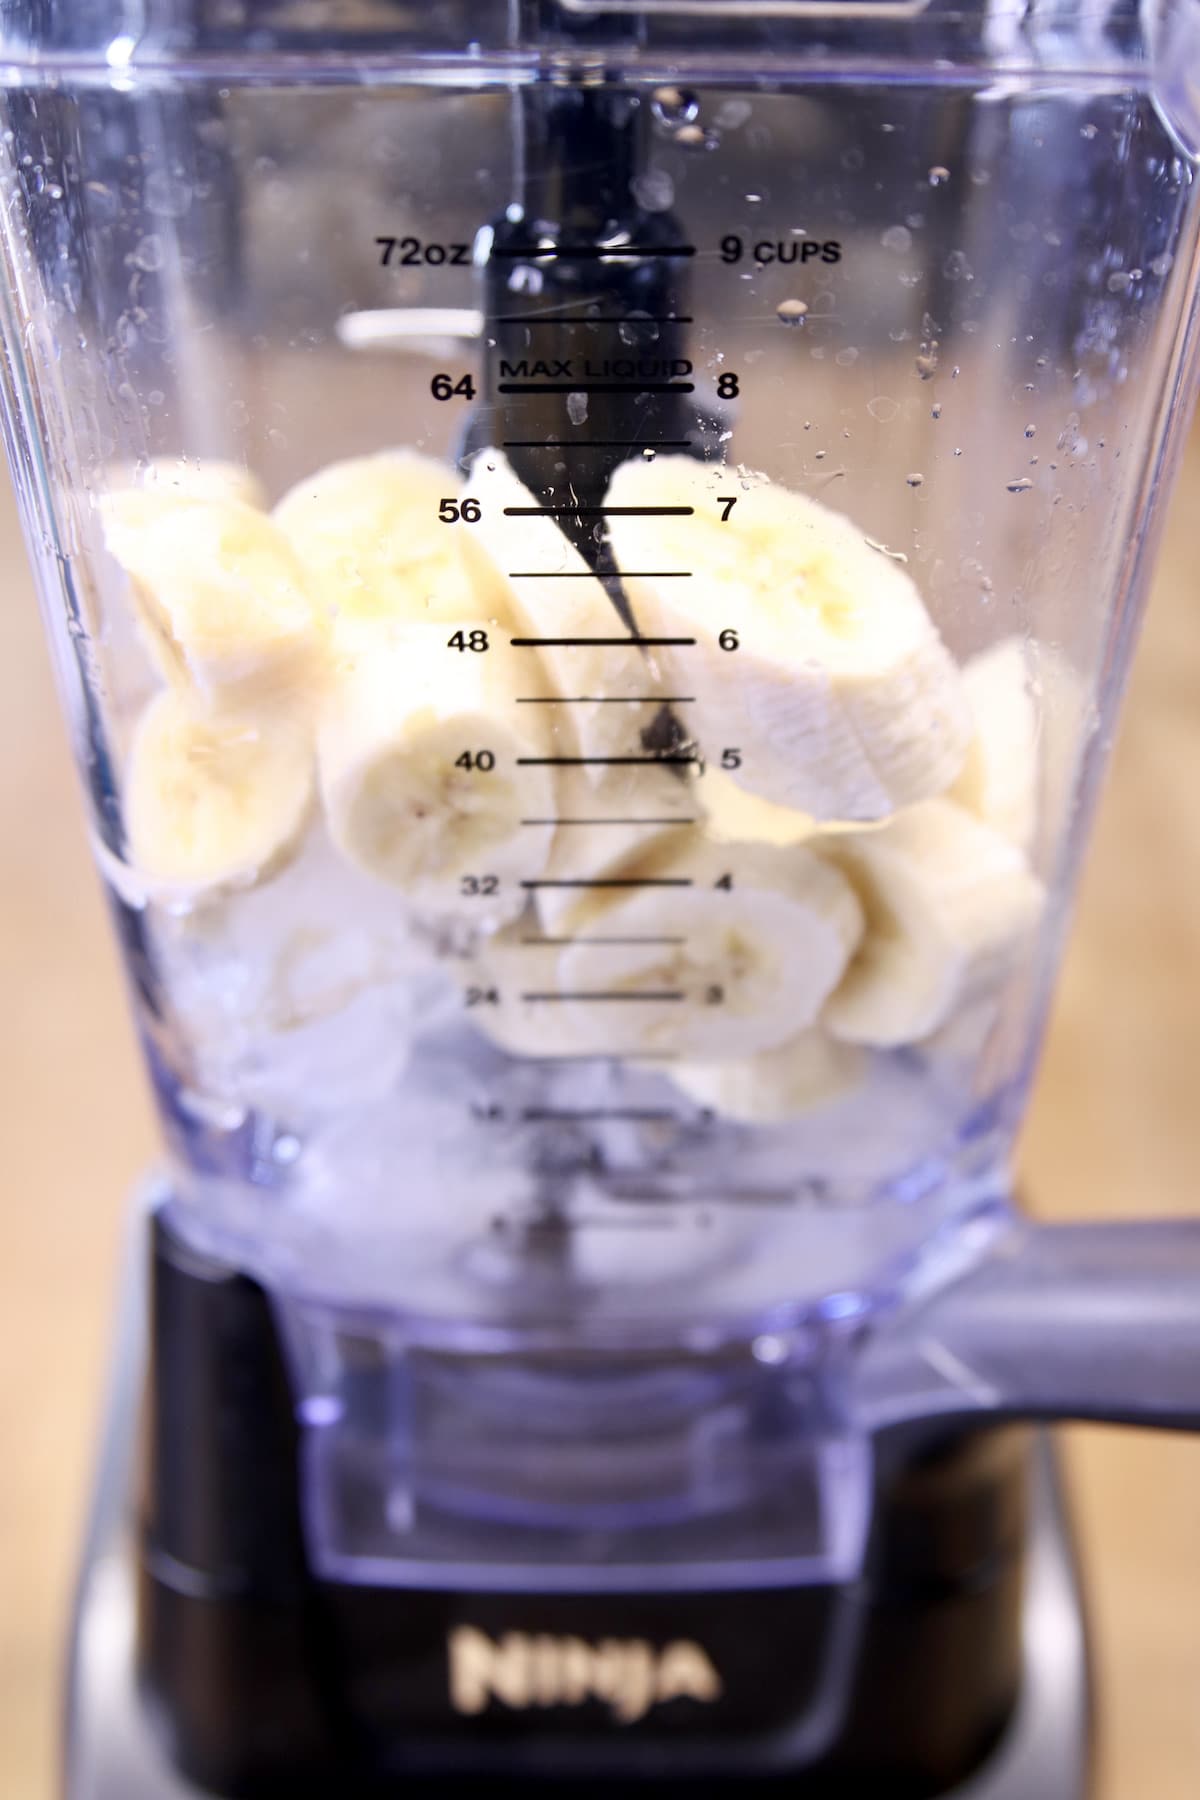 ice in a blender with sliced bananas.